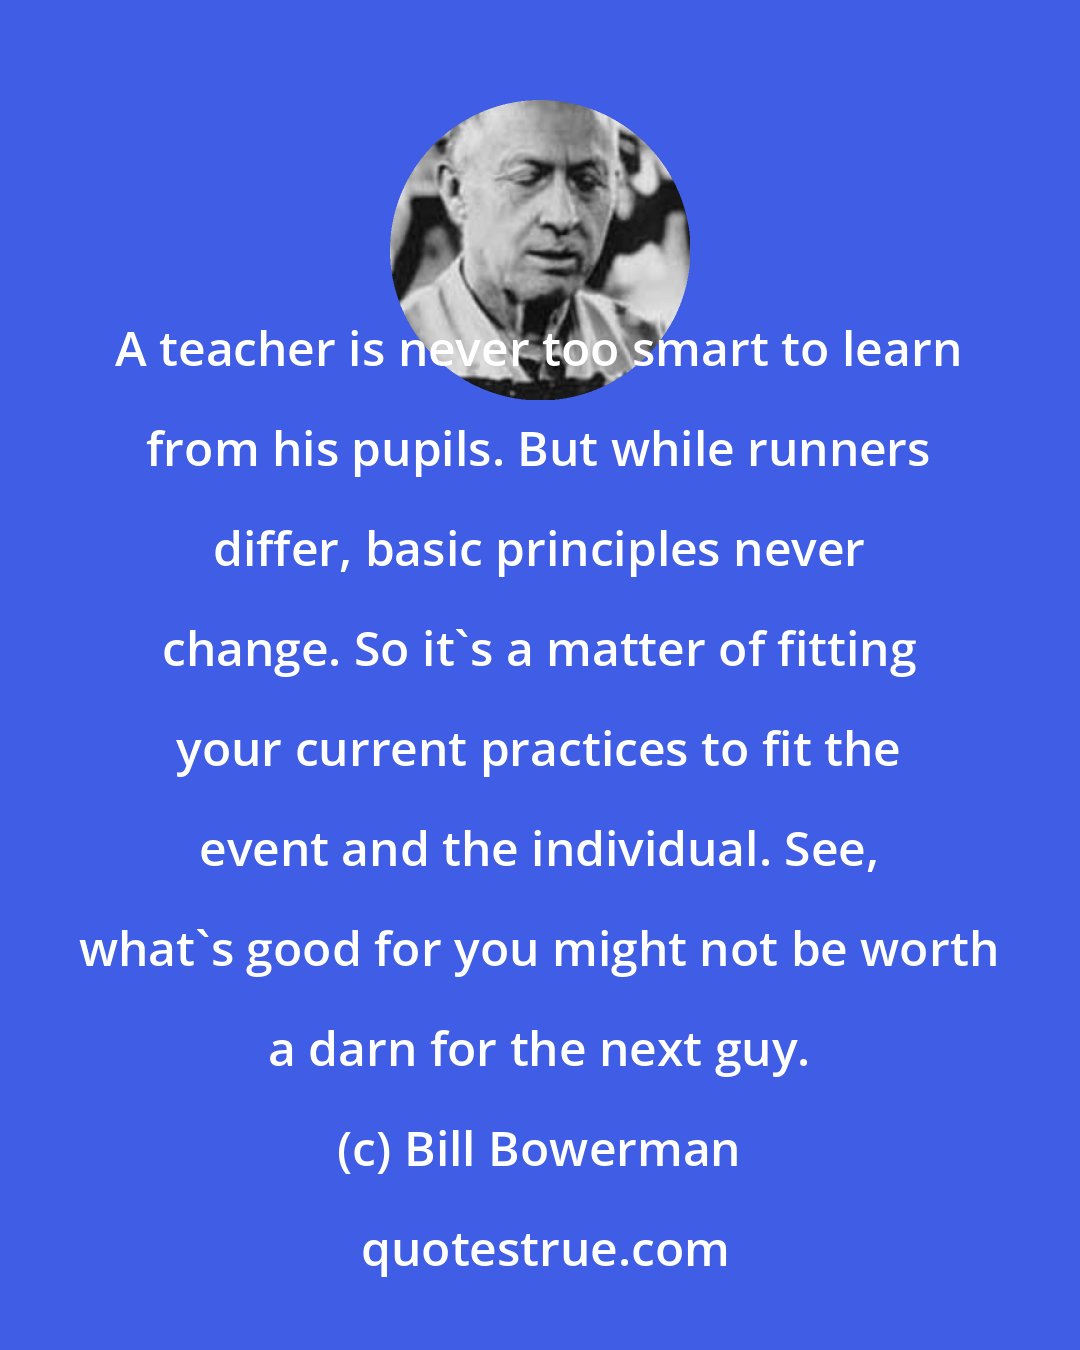 Bill Bowerman: A teacher is never too smart to learn from his pupils. But while runners differ, basic principles never change. So it's a matter of fitting your current practices to fit the event and the individual. See, what's good for you might not be worth a darn for the next guy.